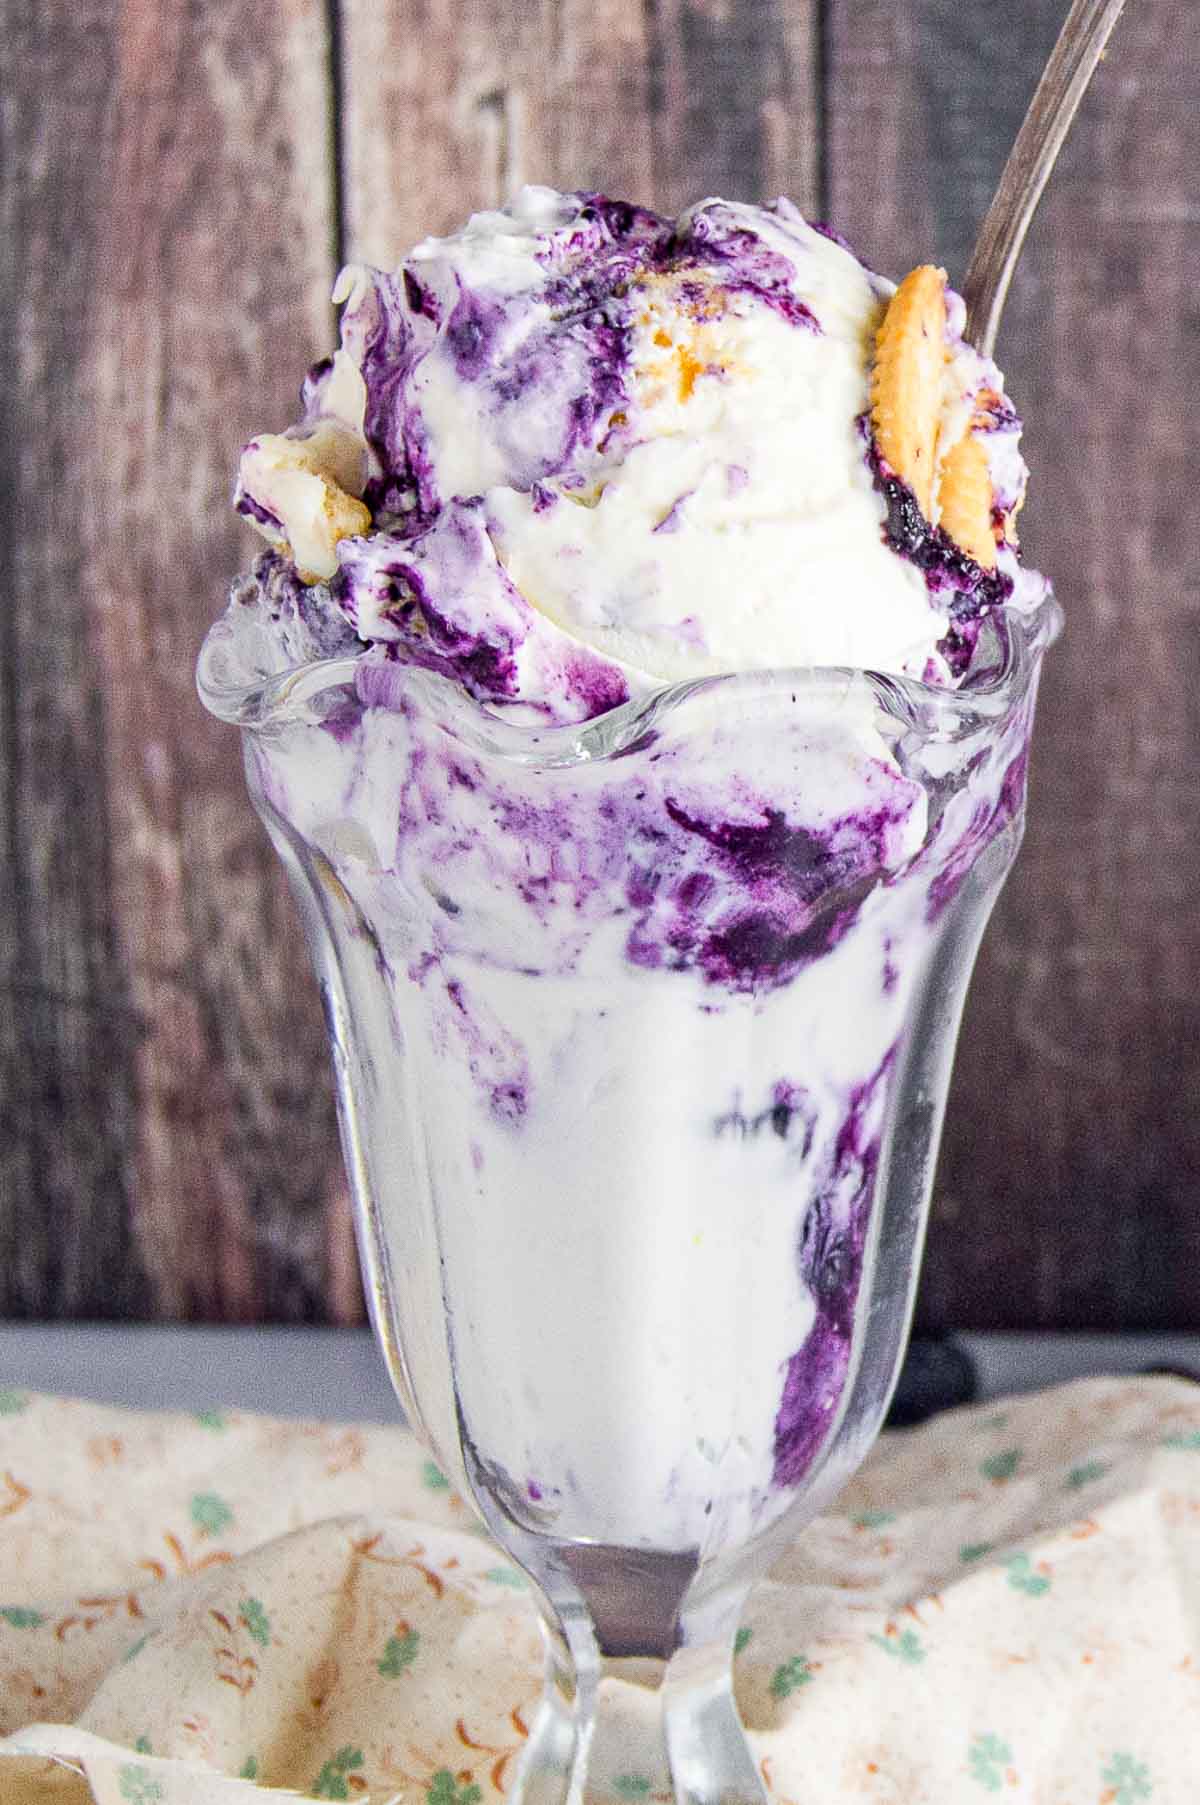 Blueberry cheesecake ice cream in a serving cup